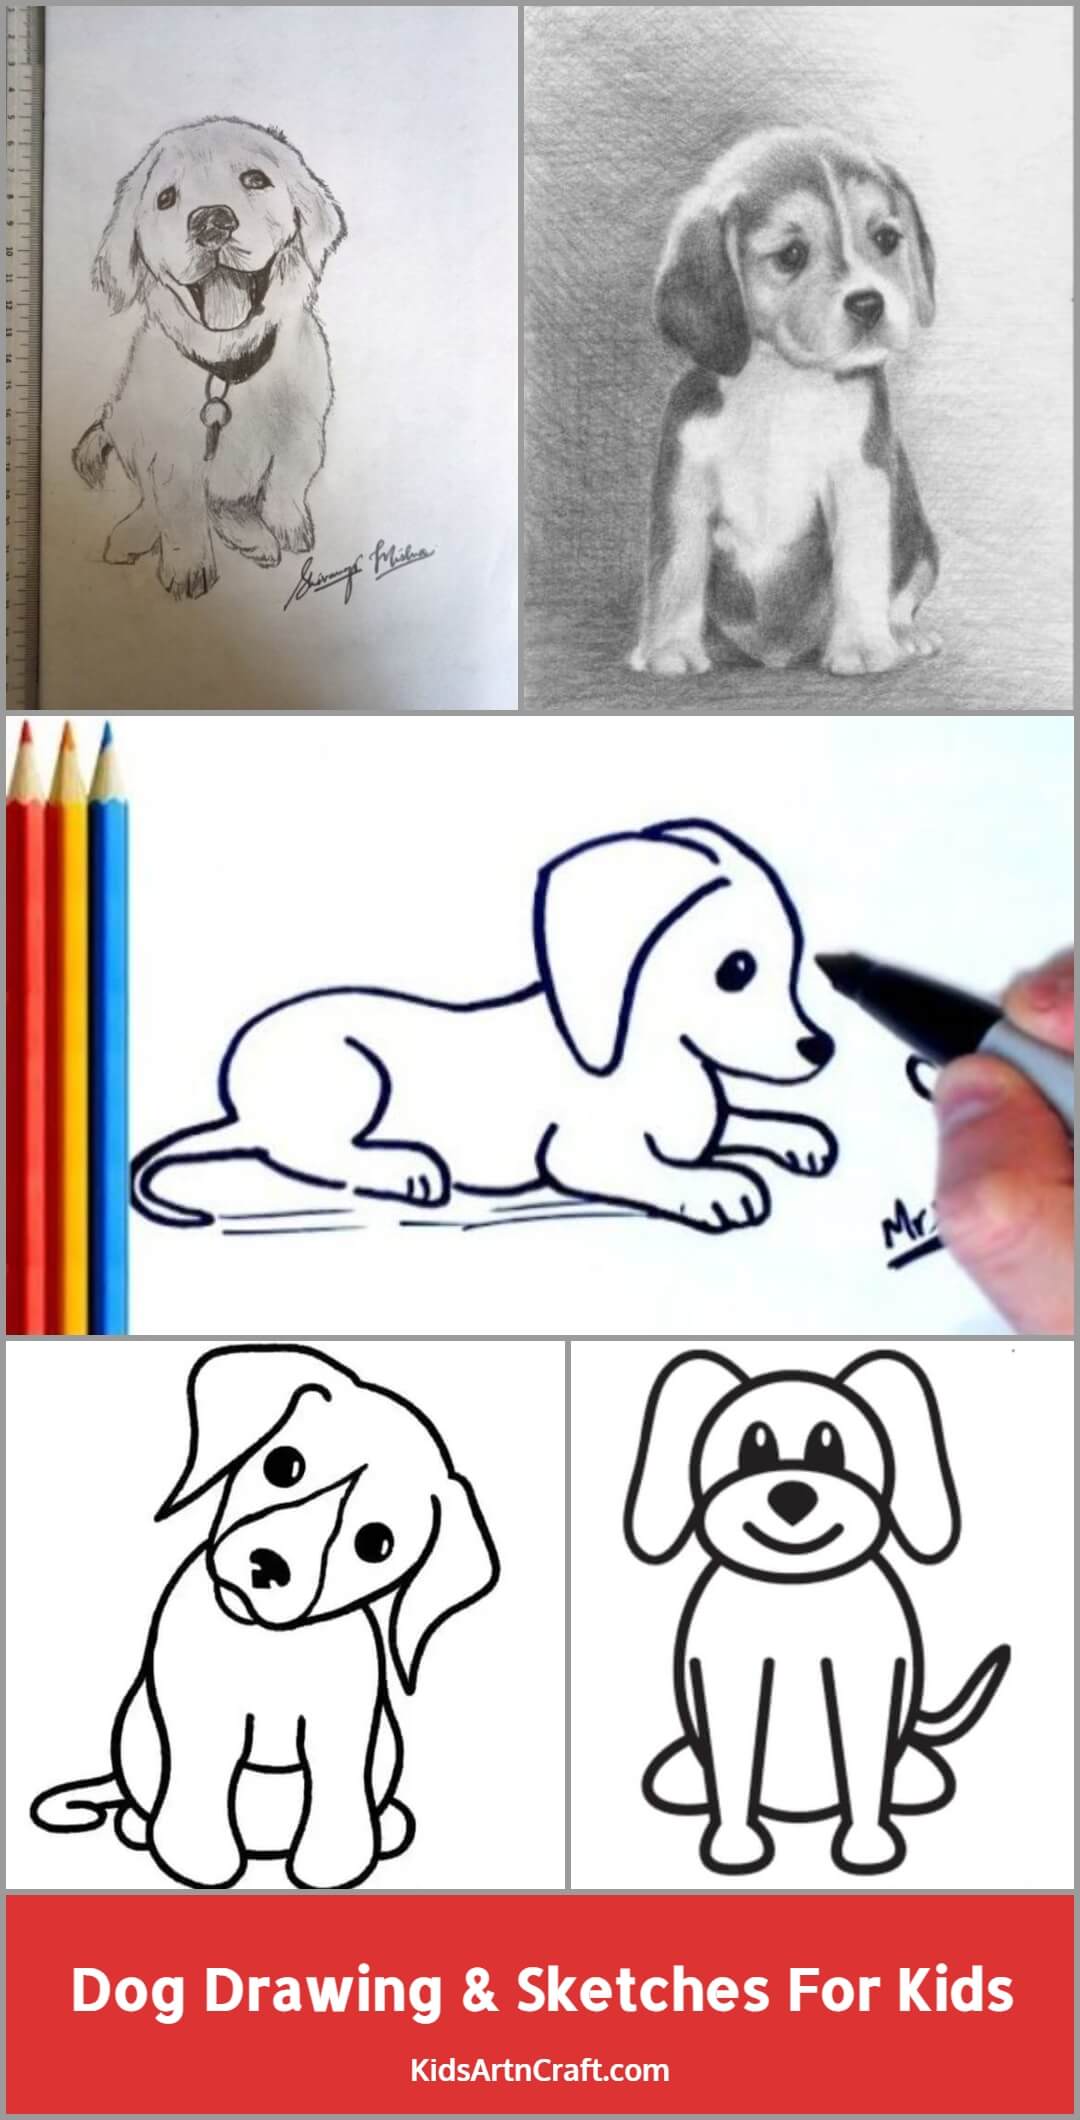 Dog Drawing & Sketches For Kids